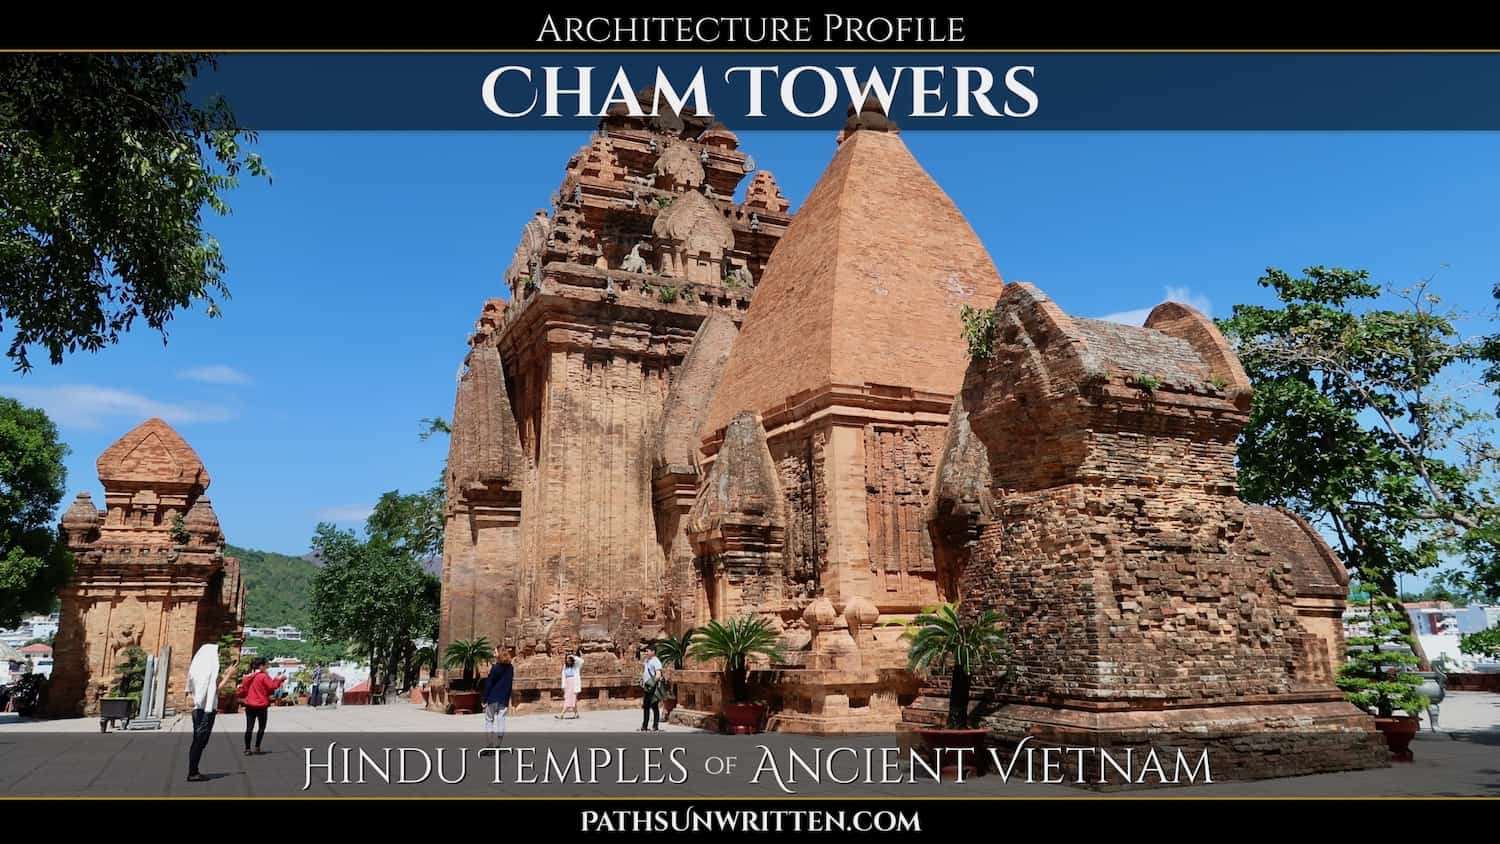 Architecture Profile: Cham Towers, the Hindu Temples of Ancient Vietnam -  Paths Unwritten